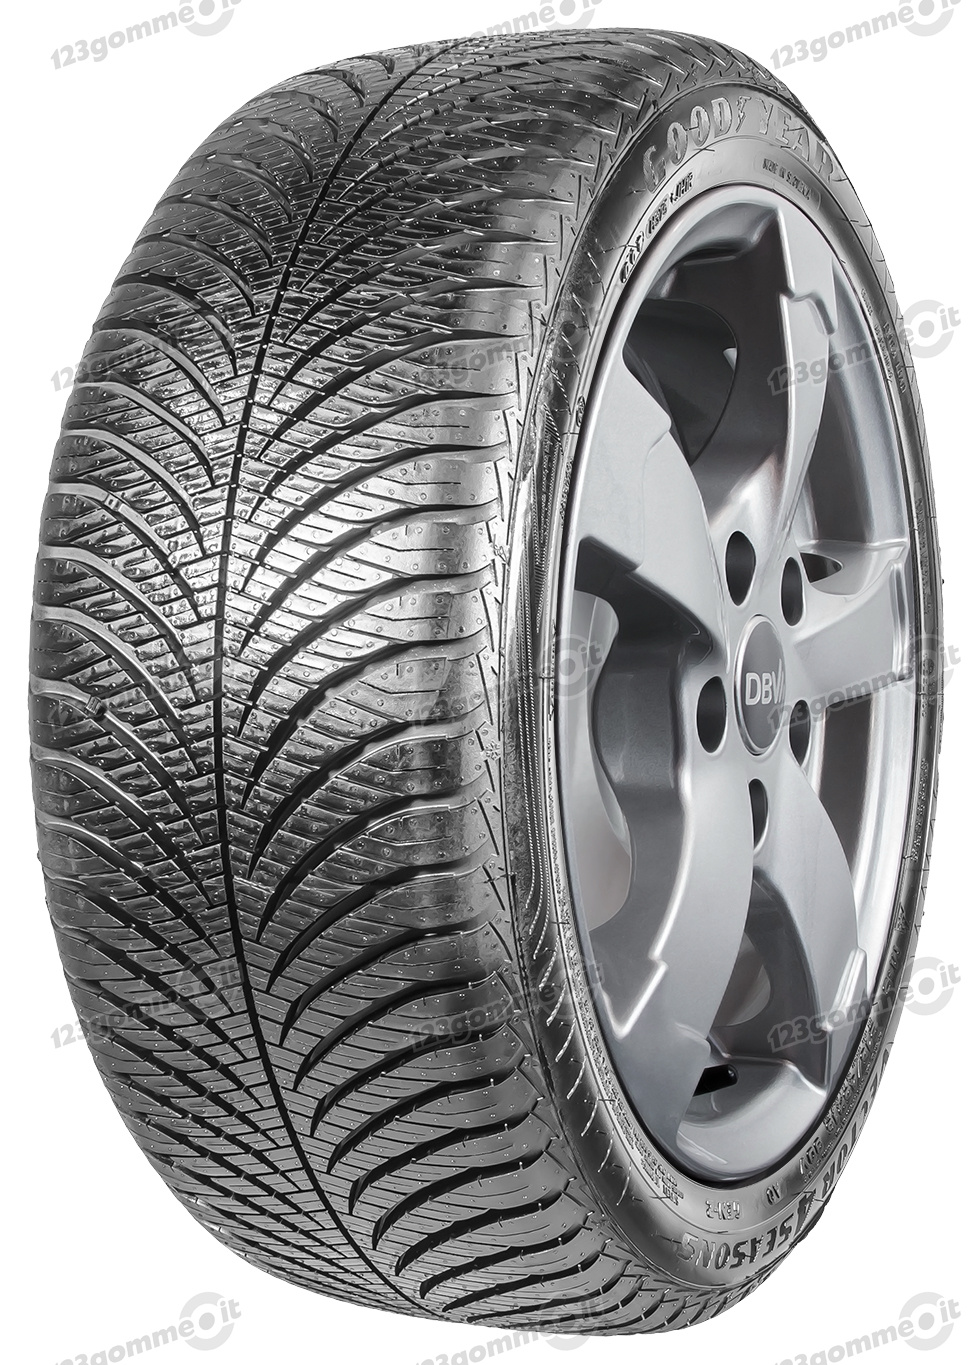 PNEUMATICI GOMME GOODYEAR VECTOR 4 SEASONS G2 M+S FO 195/55r16 87H 4 STAGIONI 